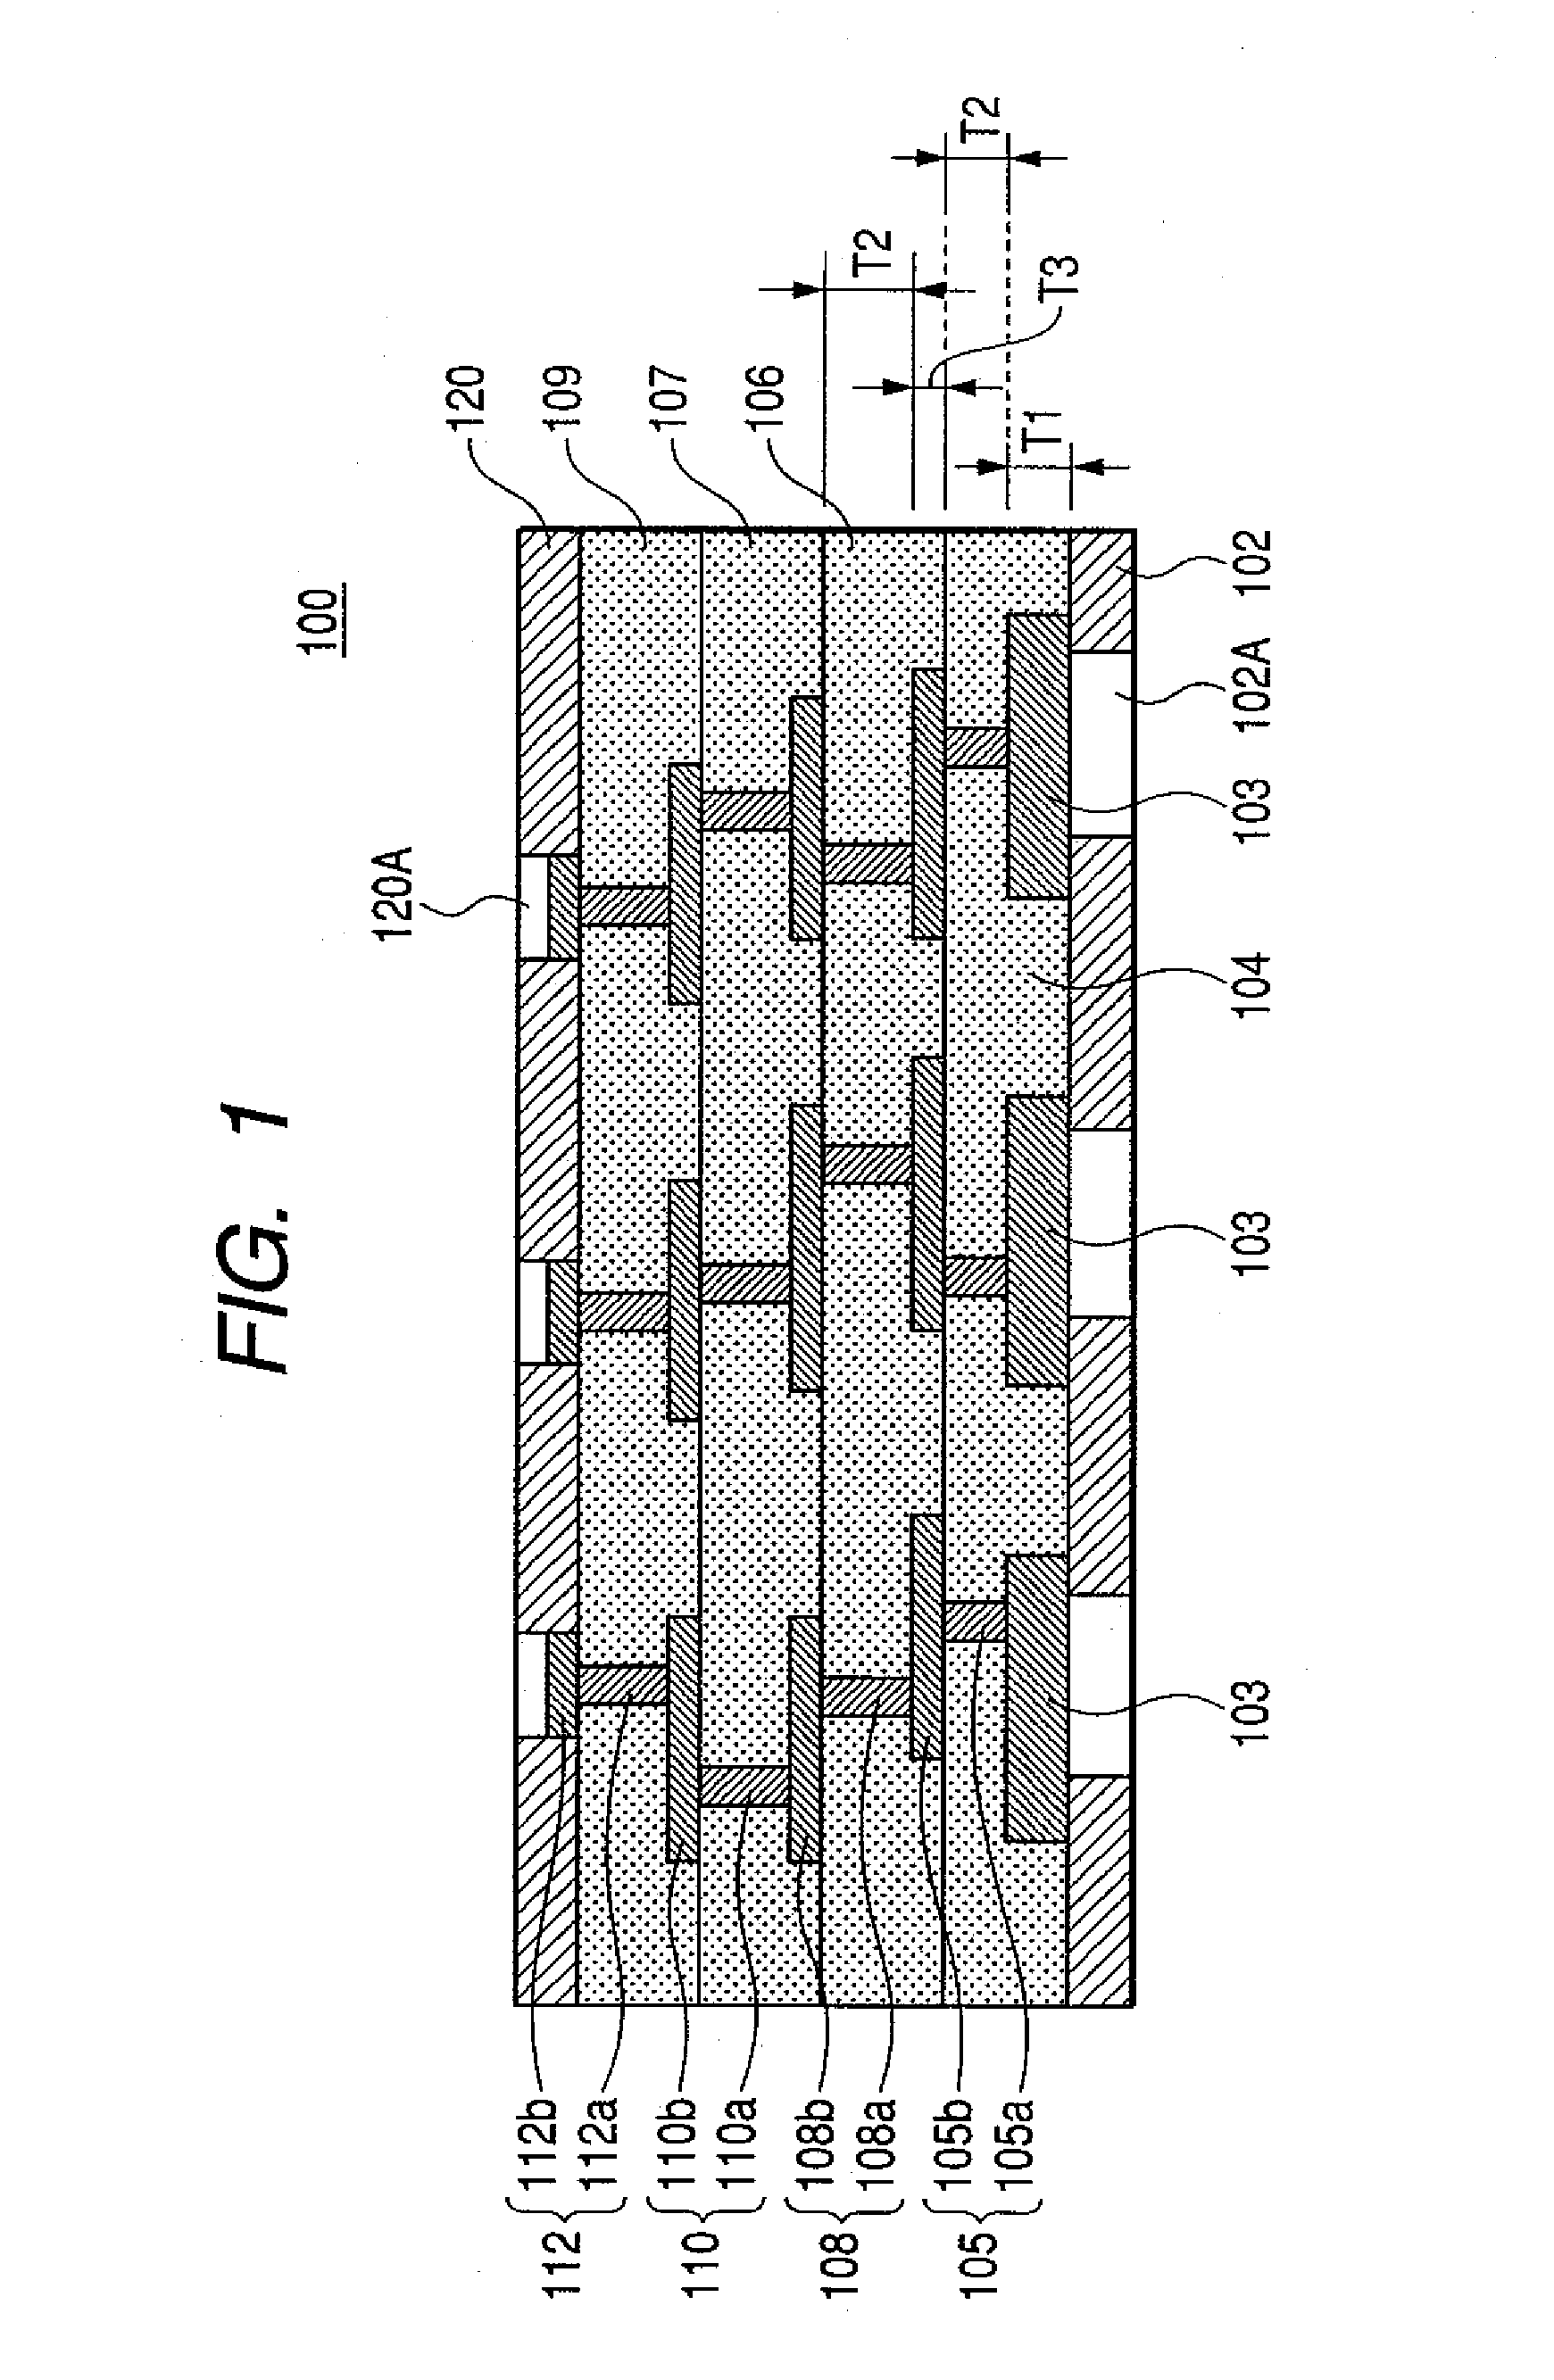 Multilayered wiring substrate including wiring layers and insulating layers and method of manufacturing the same